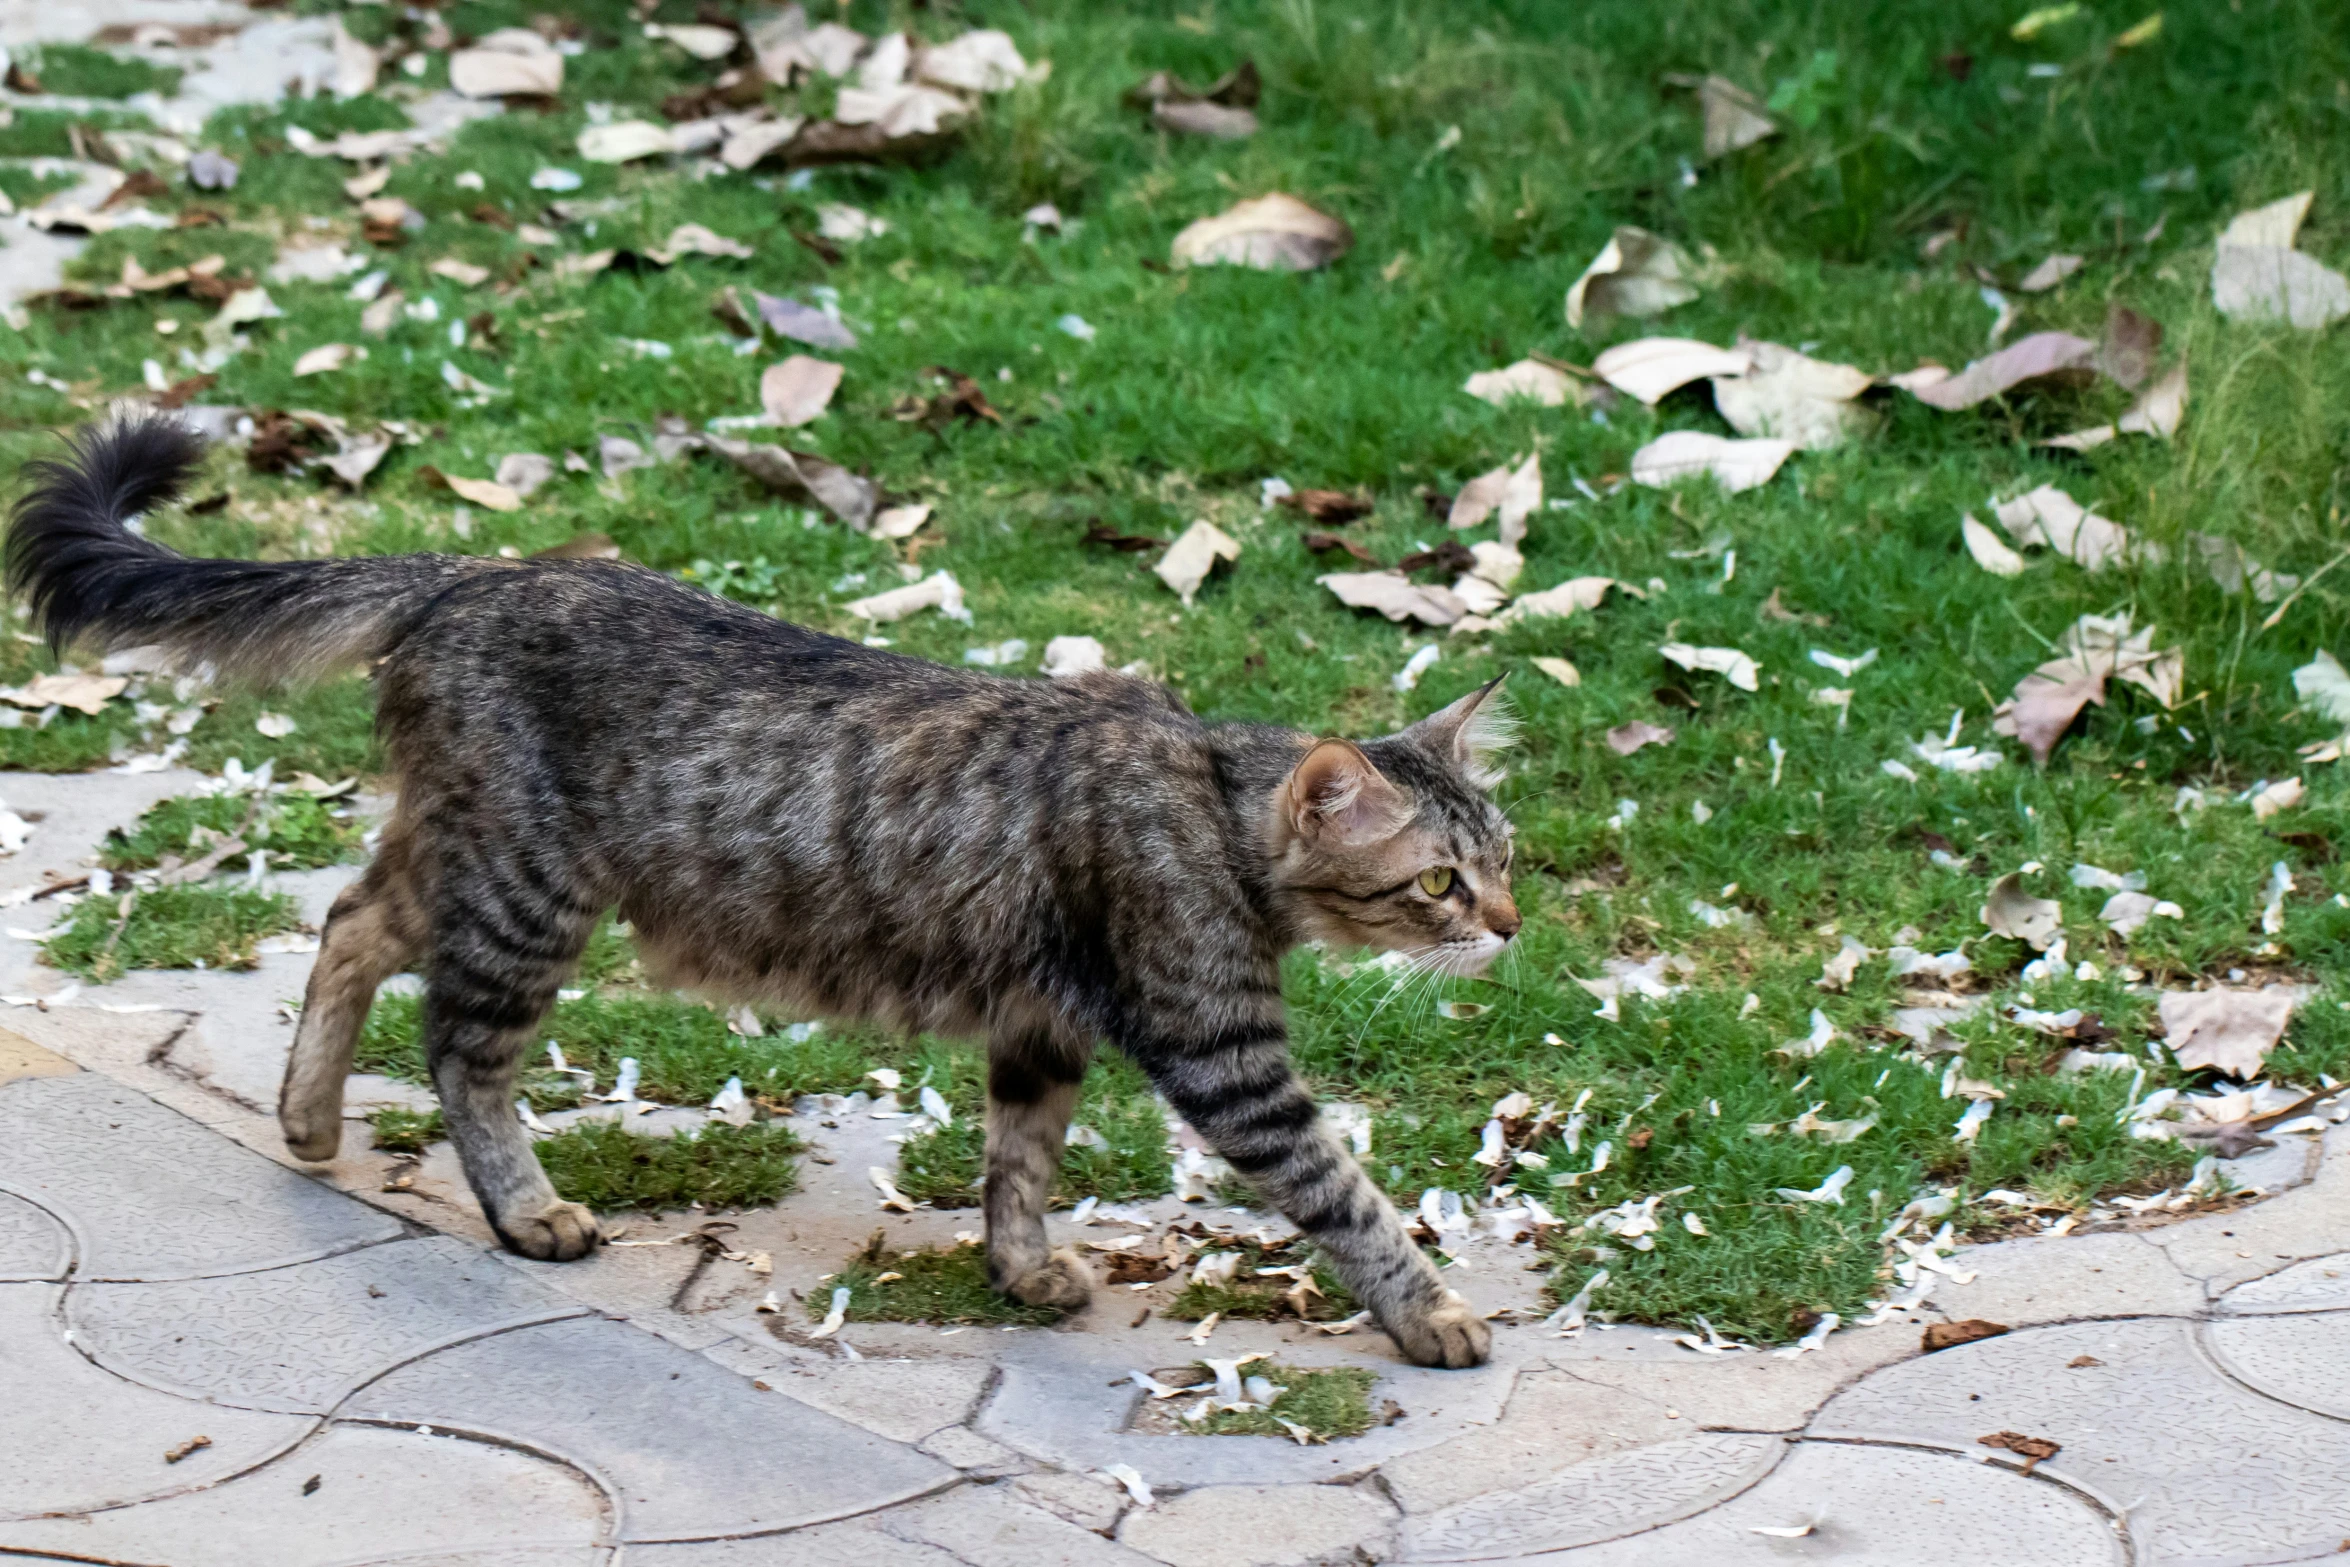 cat walking in grass area with leaves scattered all over it